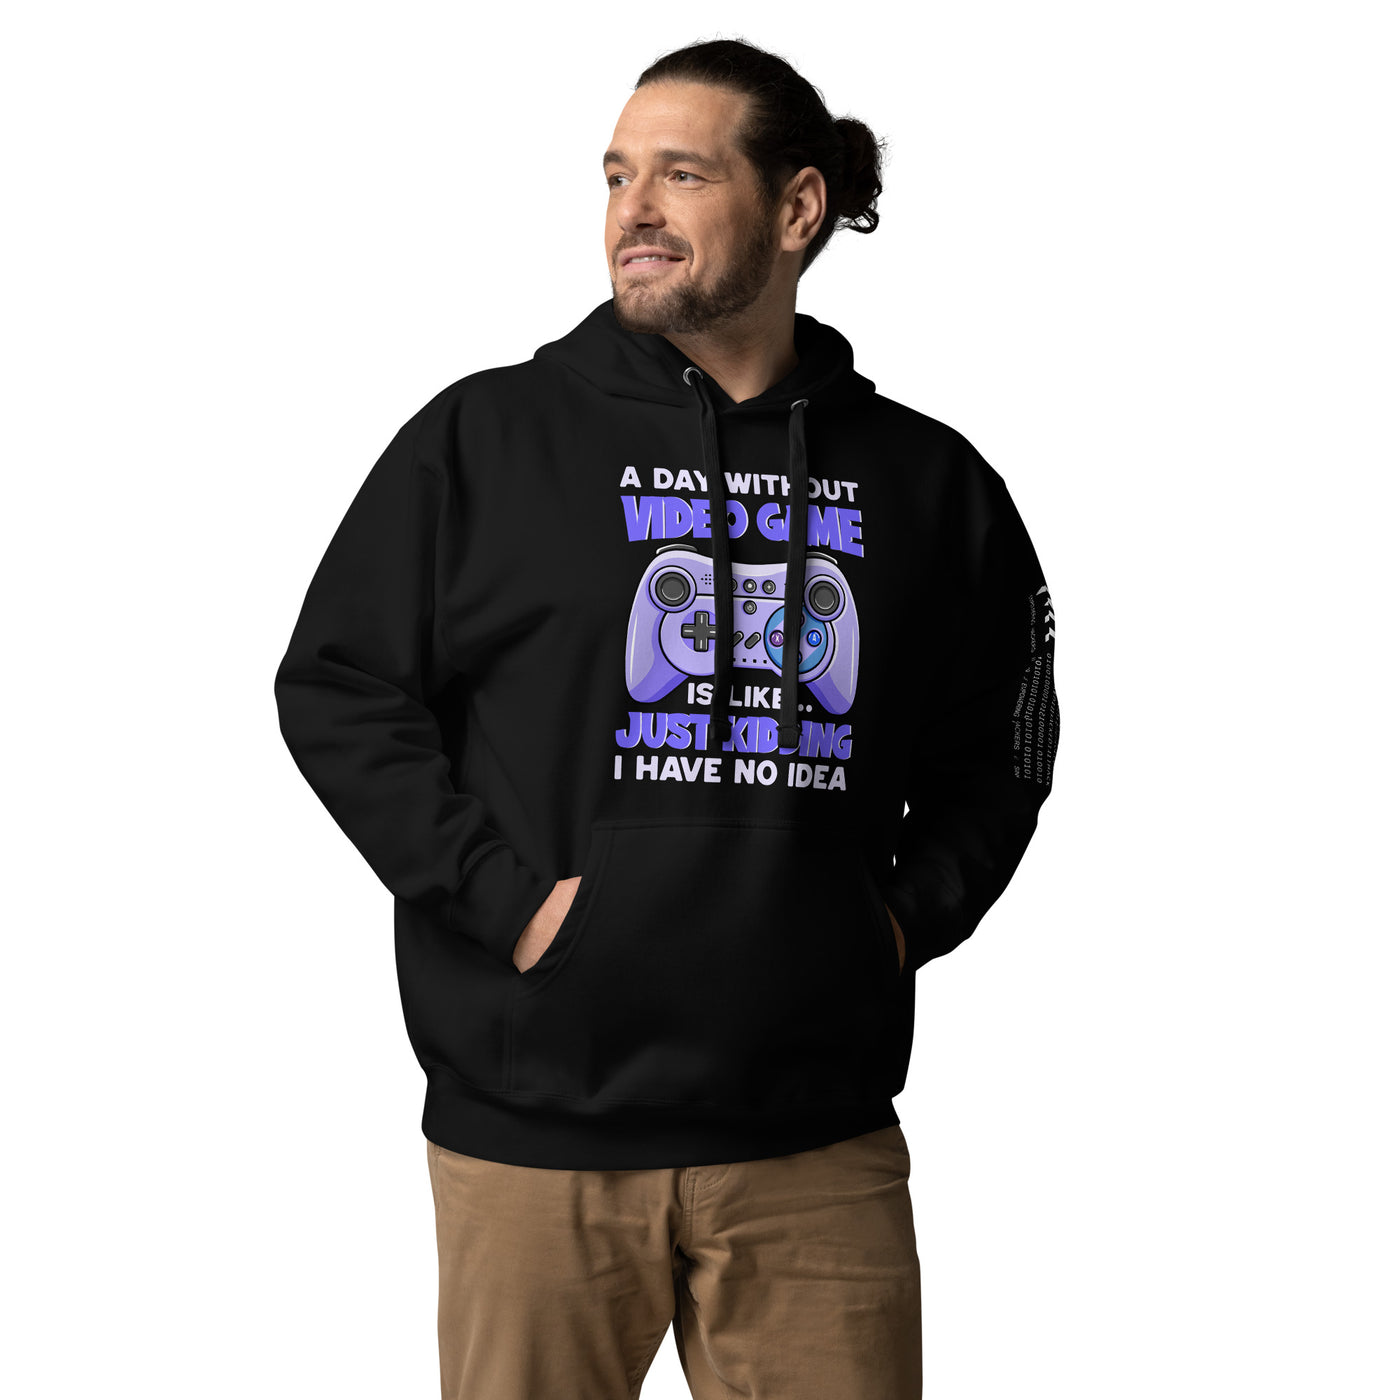 A Day without Video Game is; Just Kidding! I have no Idea - Unisex Hoodie